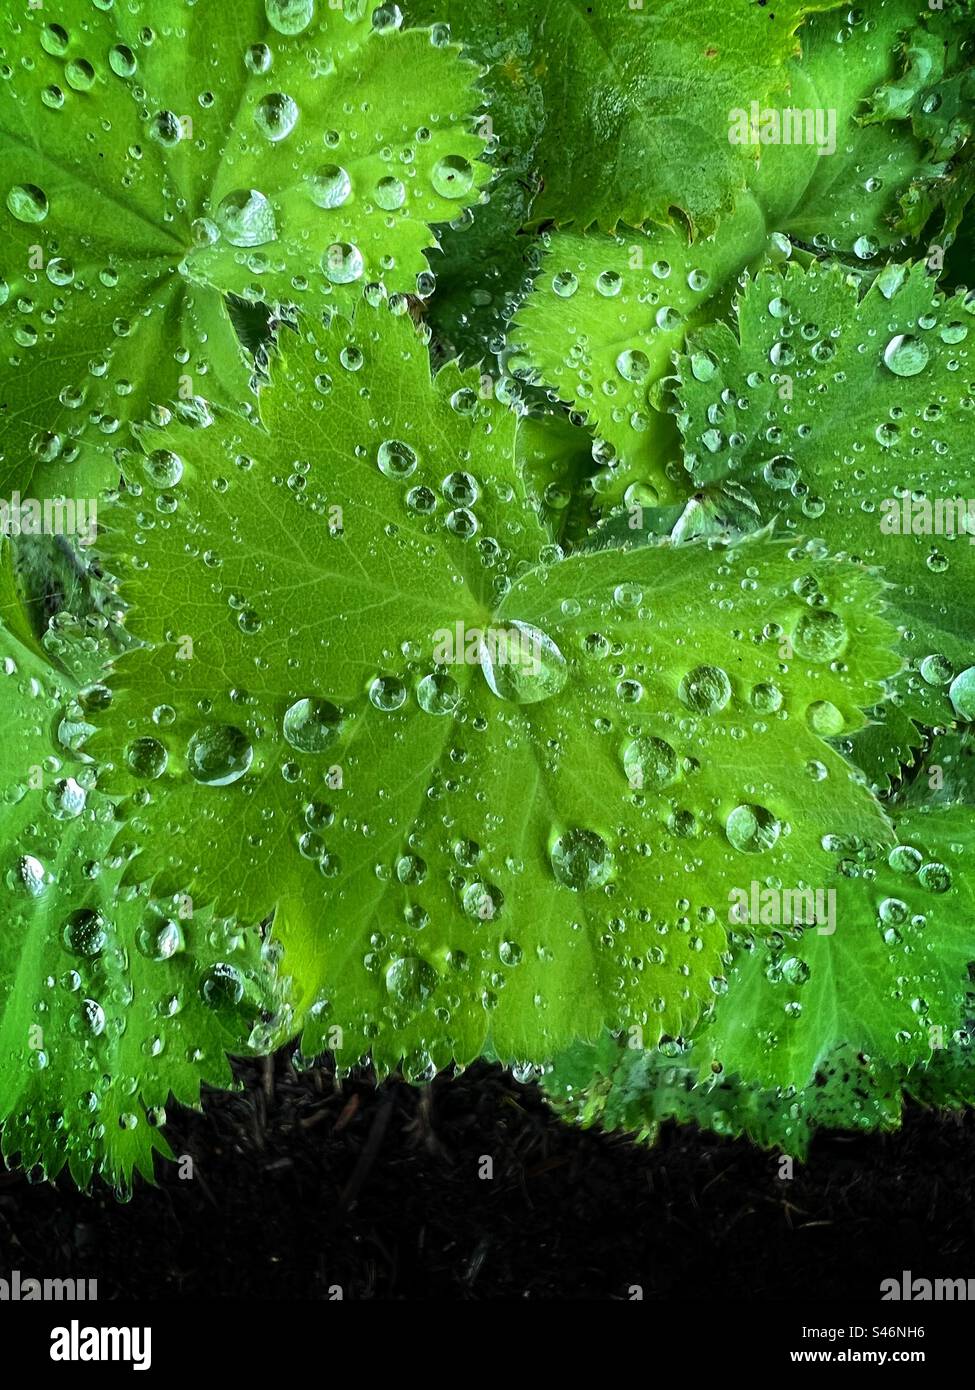 Water droplets on leaves after rain shower Stock Photo